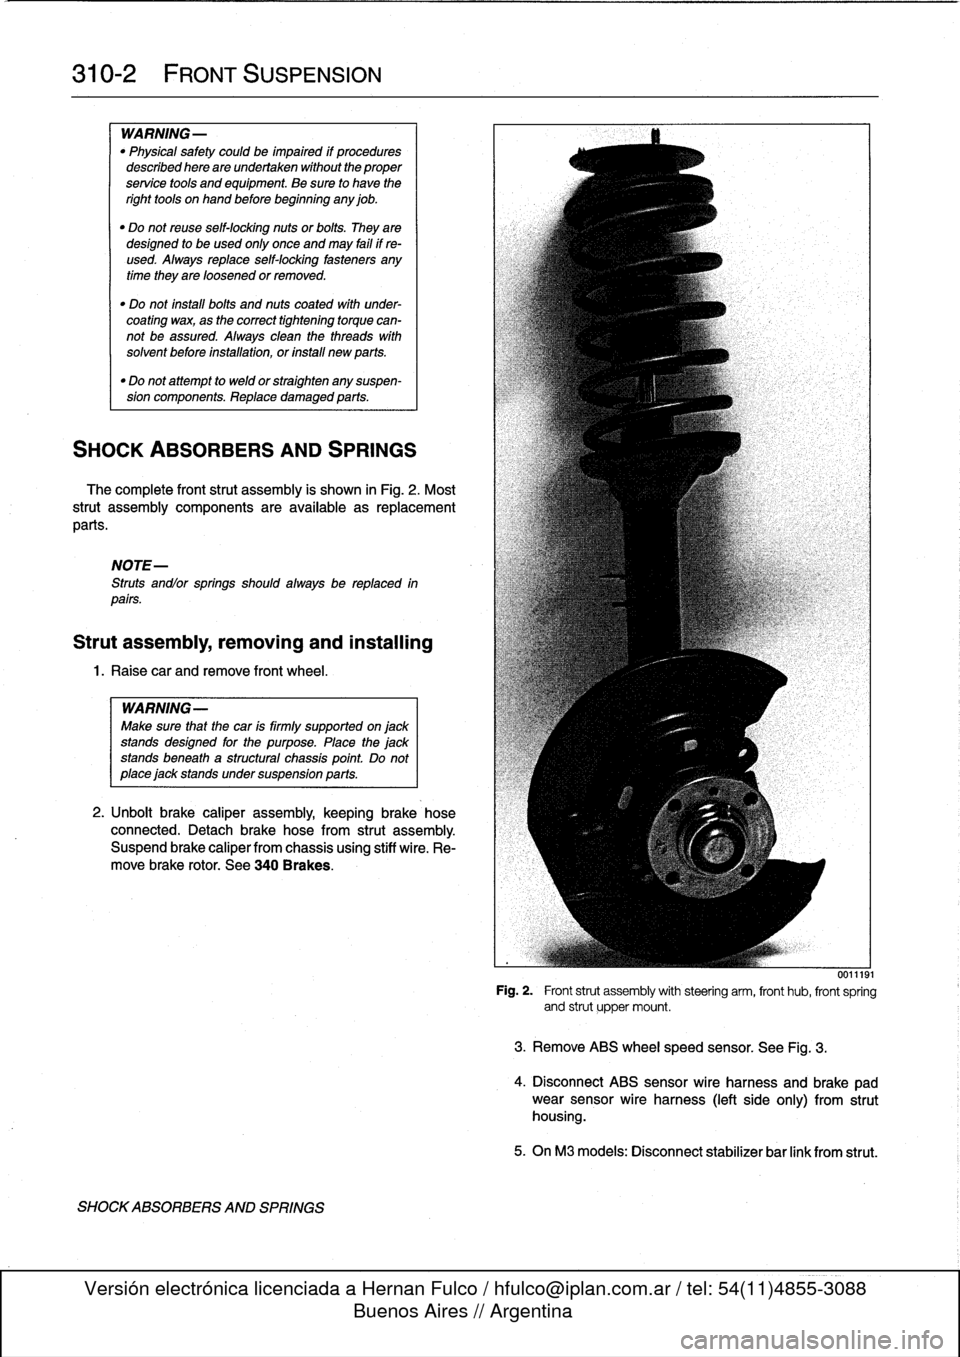 BMW 323i 1998 E36 Owners Manual 
310-2

	

FRONT
SUSPENSION

WARNING-

"
Physical
safety
could
be
impaired
if
procedures
described
here
areundertaken
without
the
proper
service
tools
and
equipment
.
Be
sure
to
have
the
right
tools
o